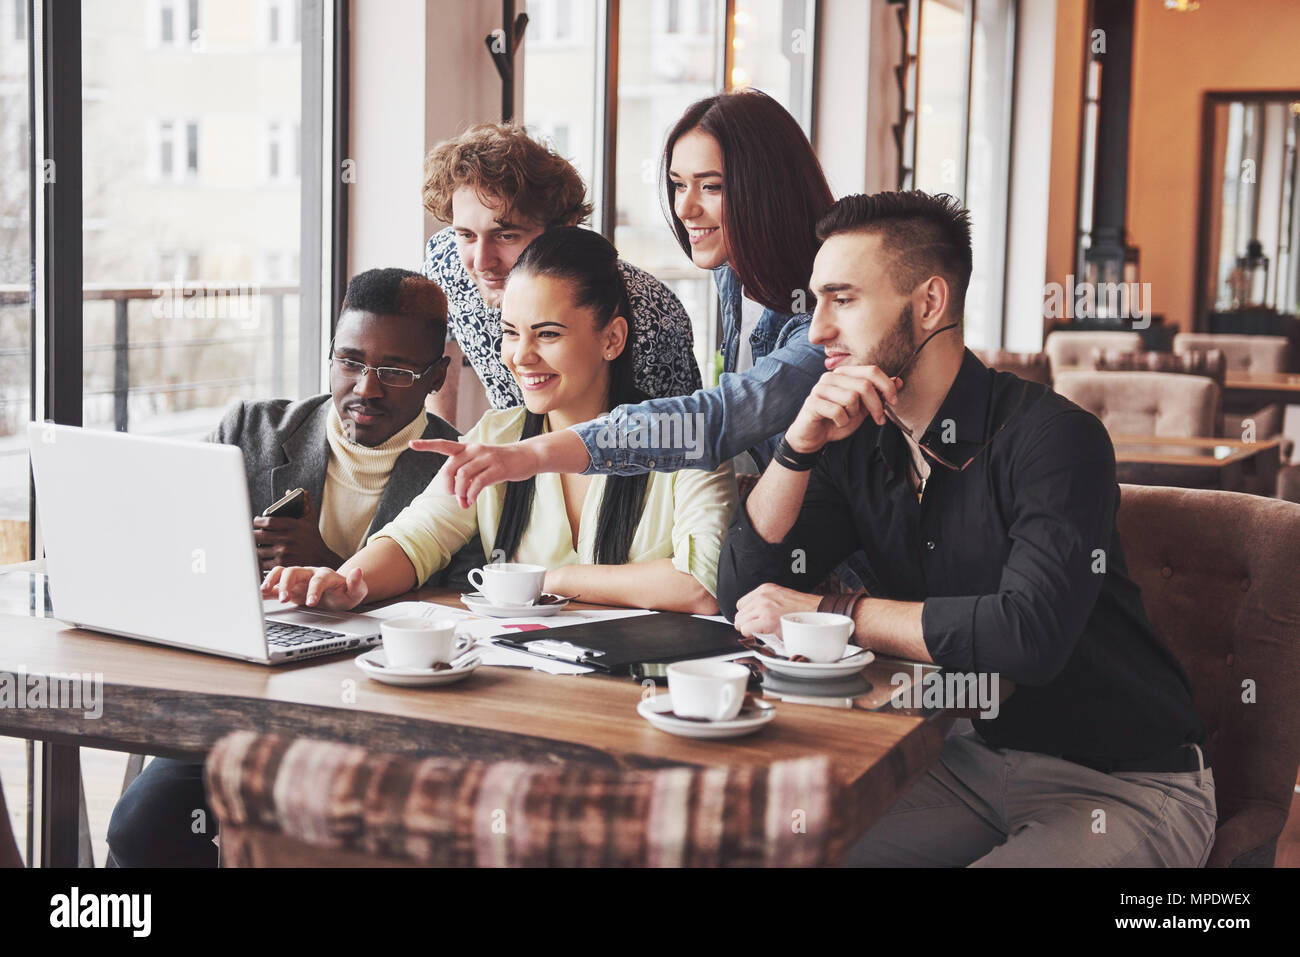 Group portrait of Cheerful old friends communicate with each other, friend posing on cafe, Urban style people having fun, Concepts about youth togetherness lifestyle. Wifi connected Stock Photo